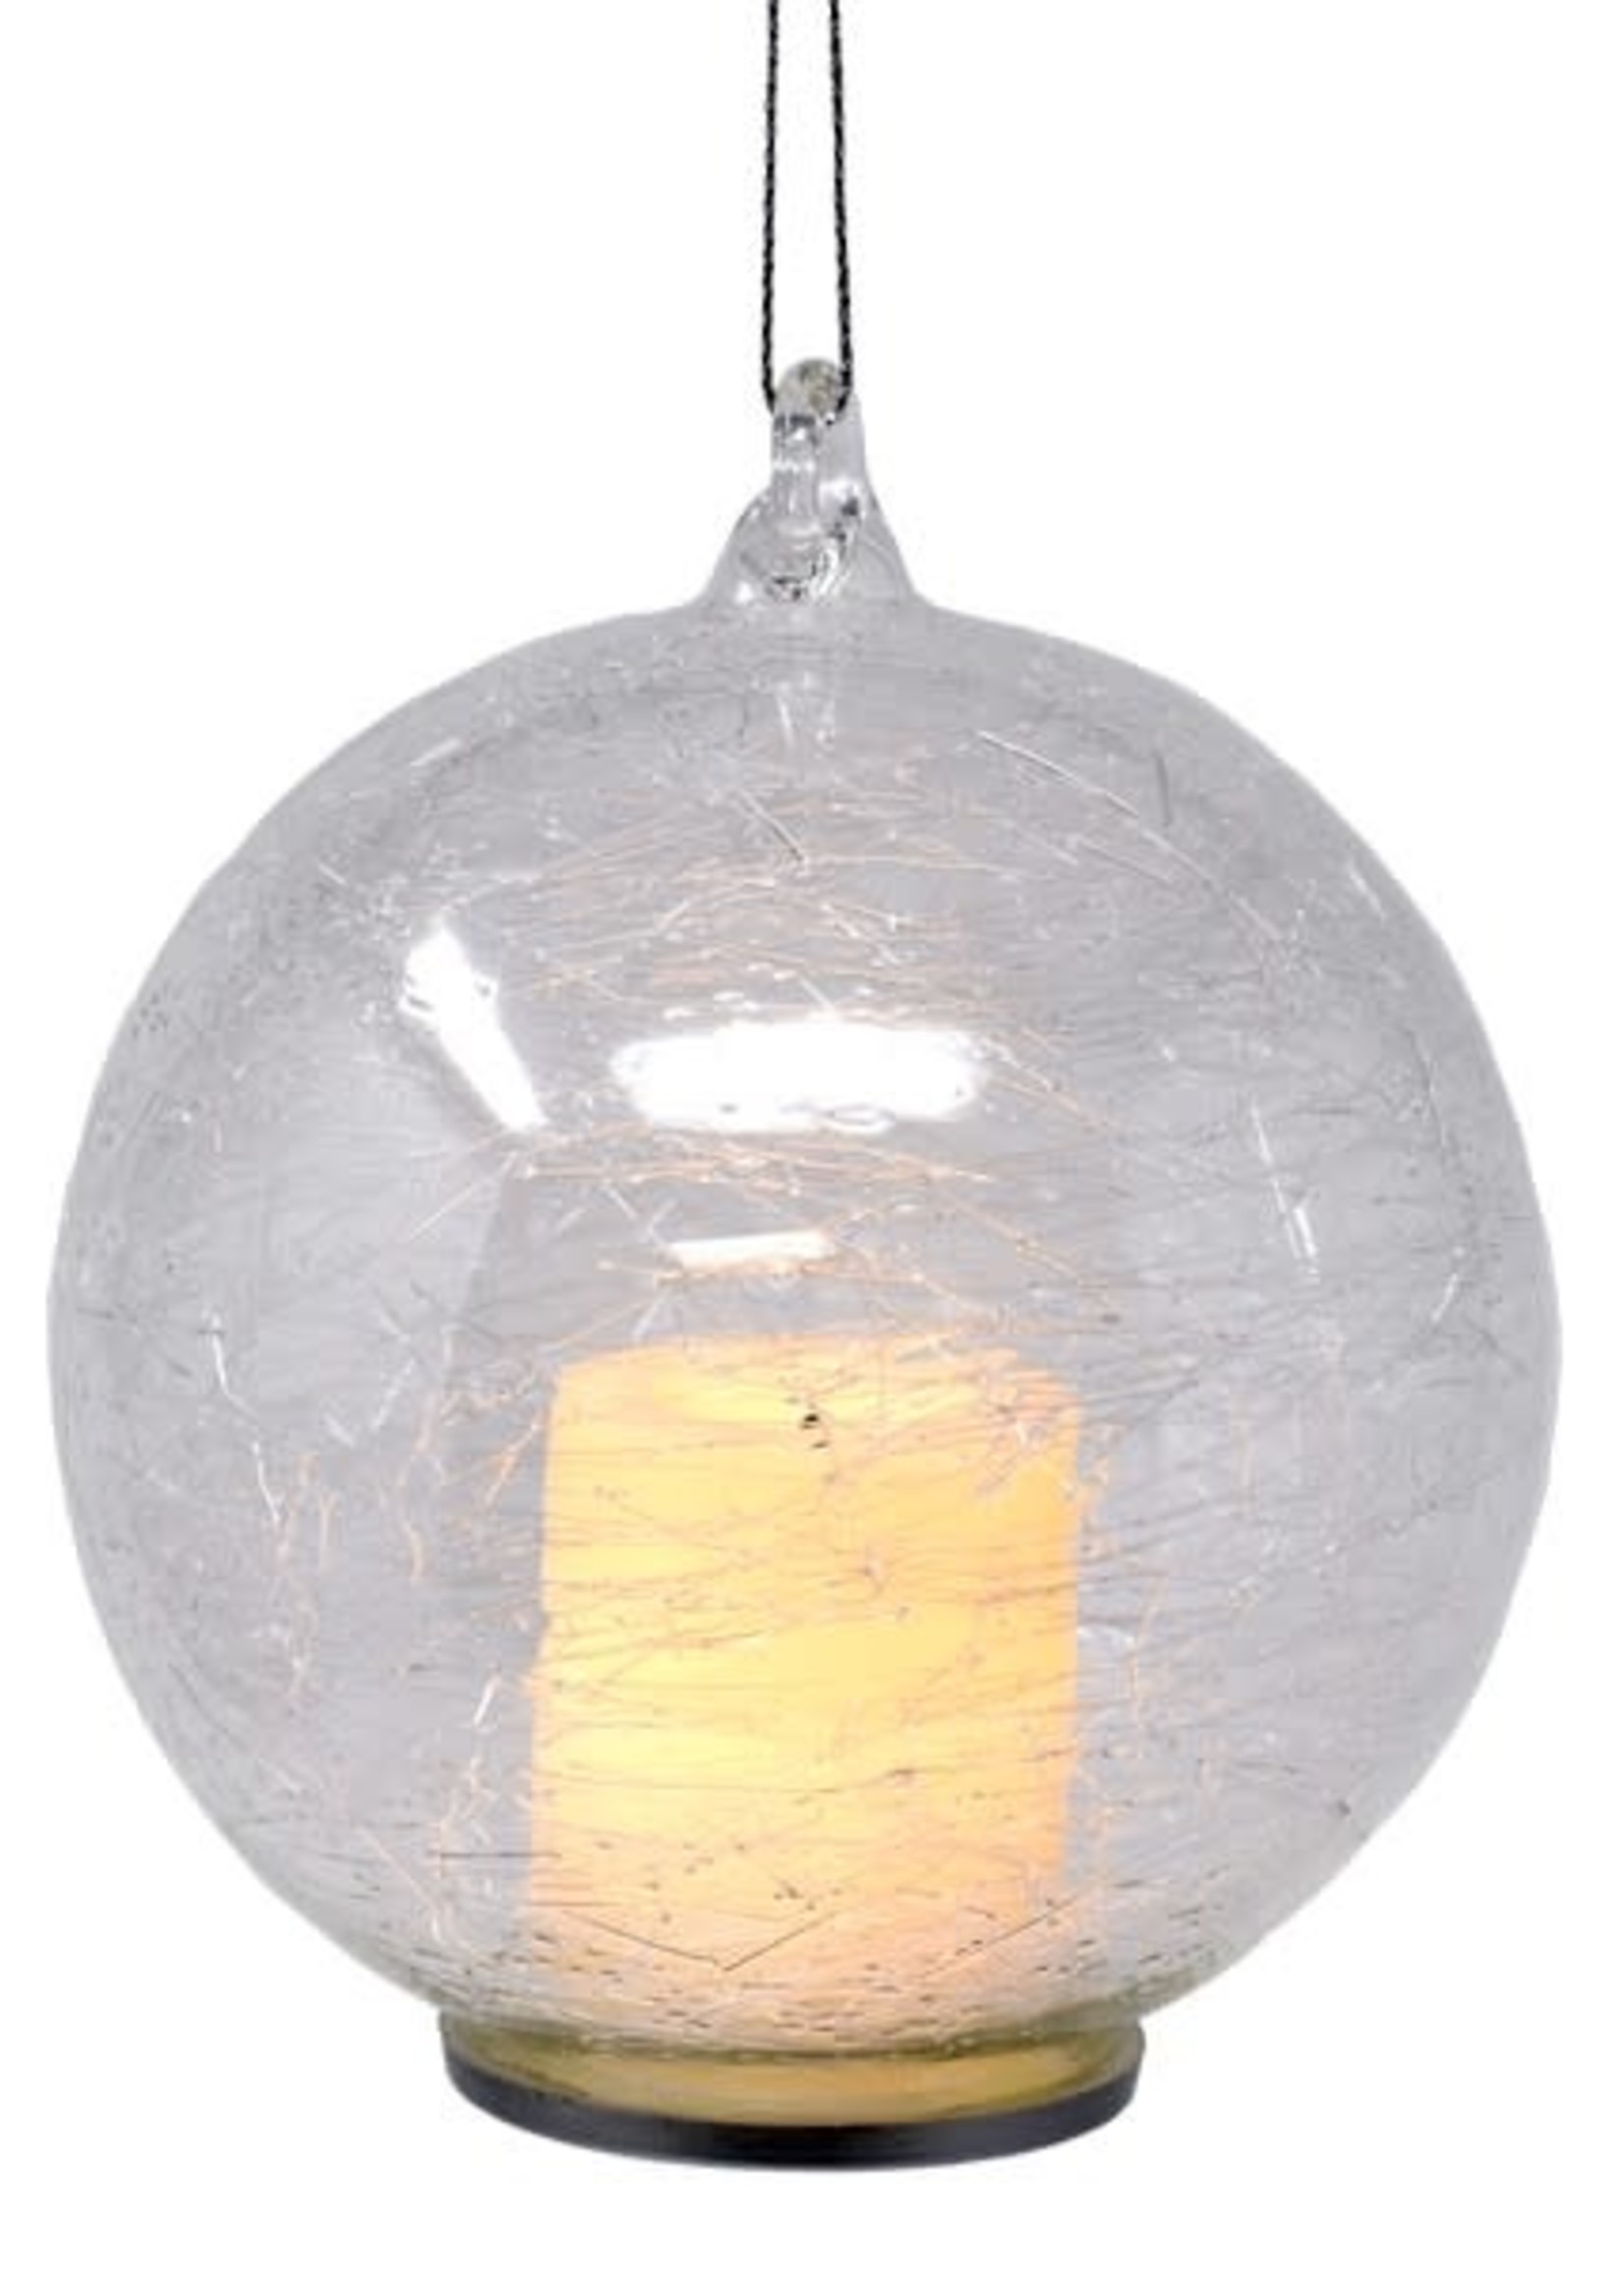 Design Decor Christmas LED Candle in Globe - Contemporary